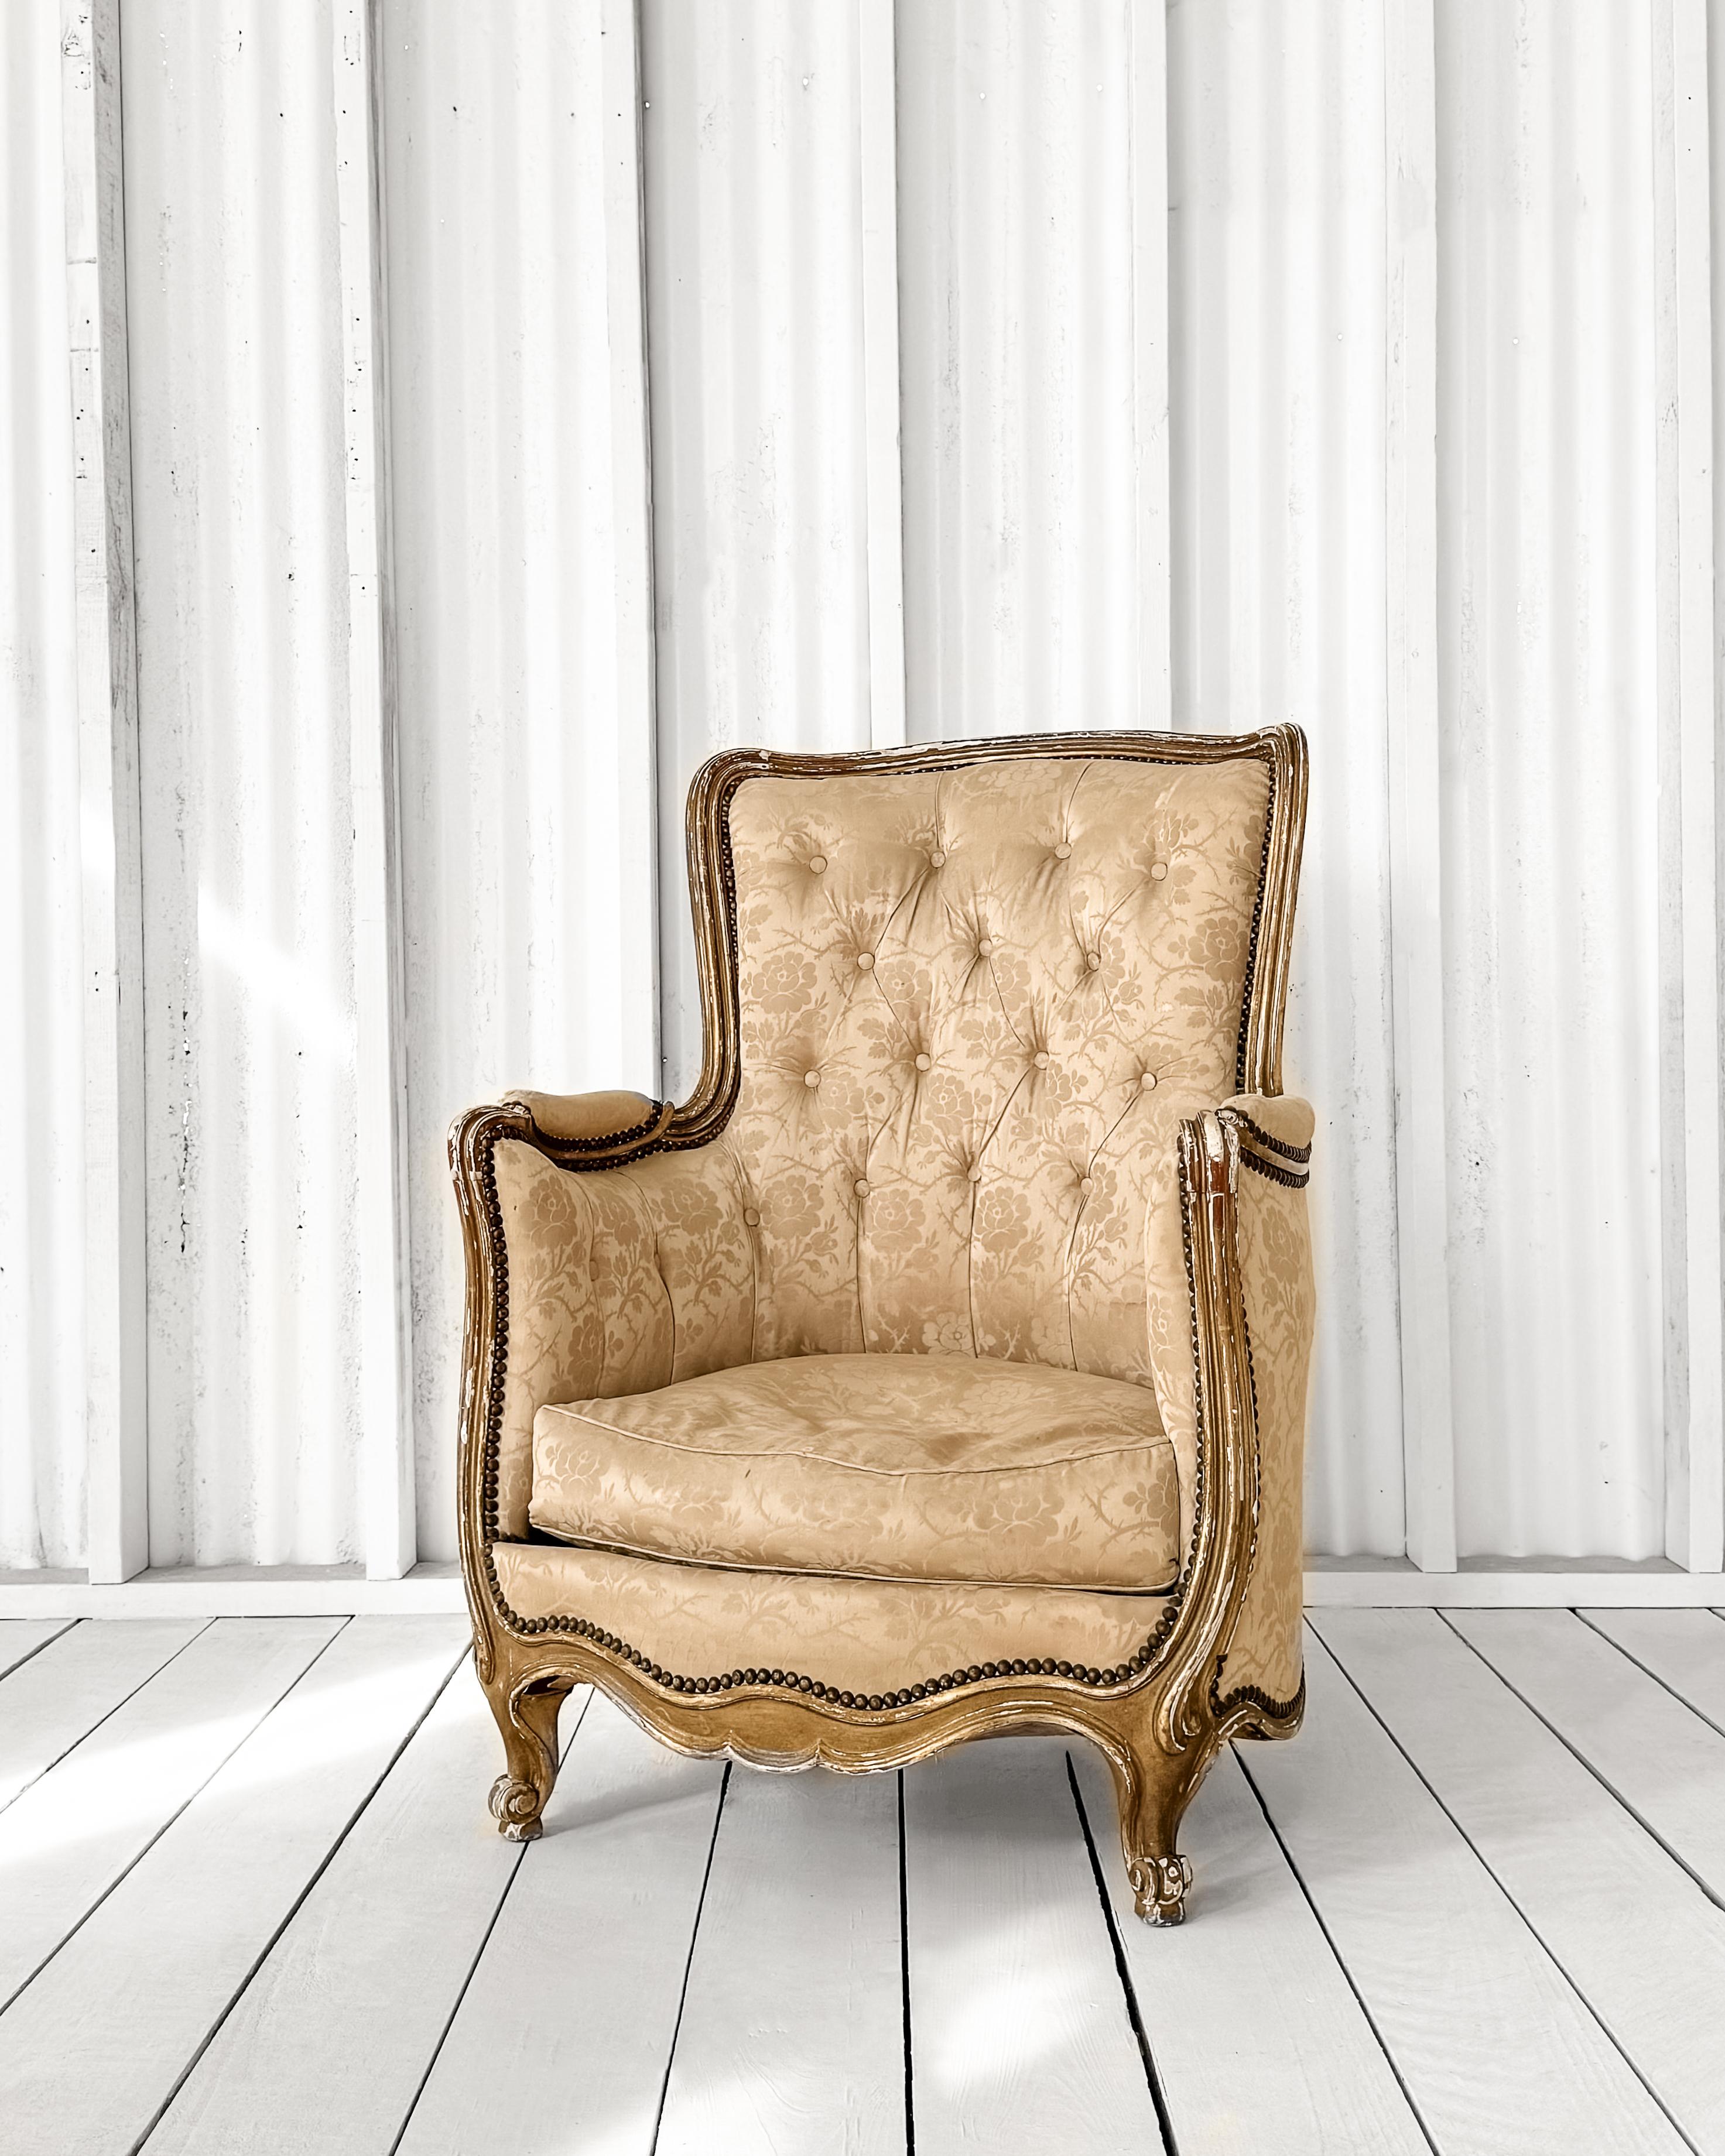 This French Louis XV Bergère style armchair is a masterpiece of craftsmanship from the early 19th century. The hand-molded frame and barrel back exhibit meticulous attention to detail, showcasing the artistry of pinned mortise and tenon